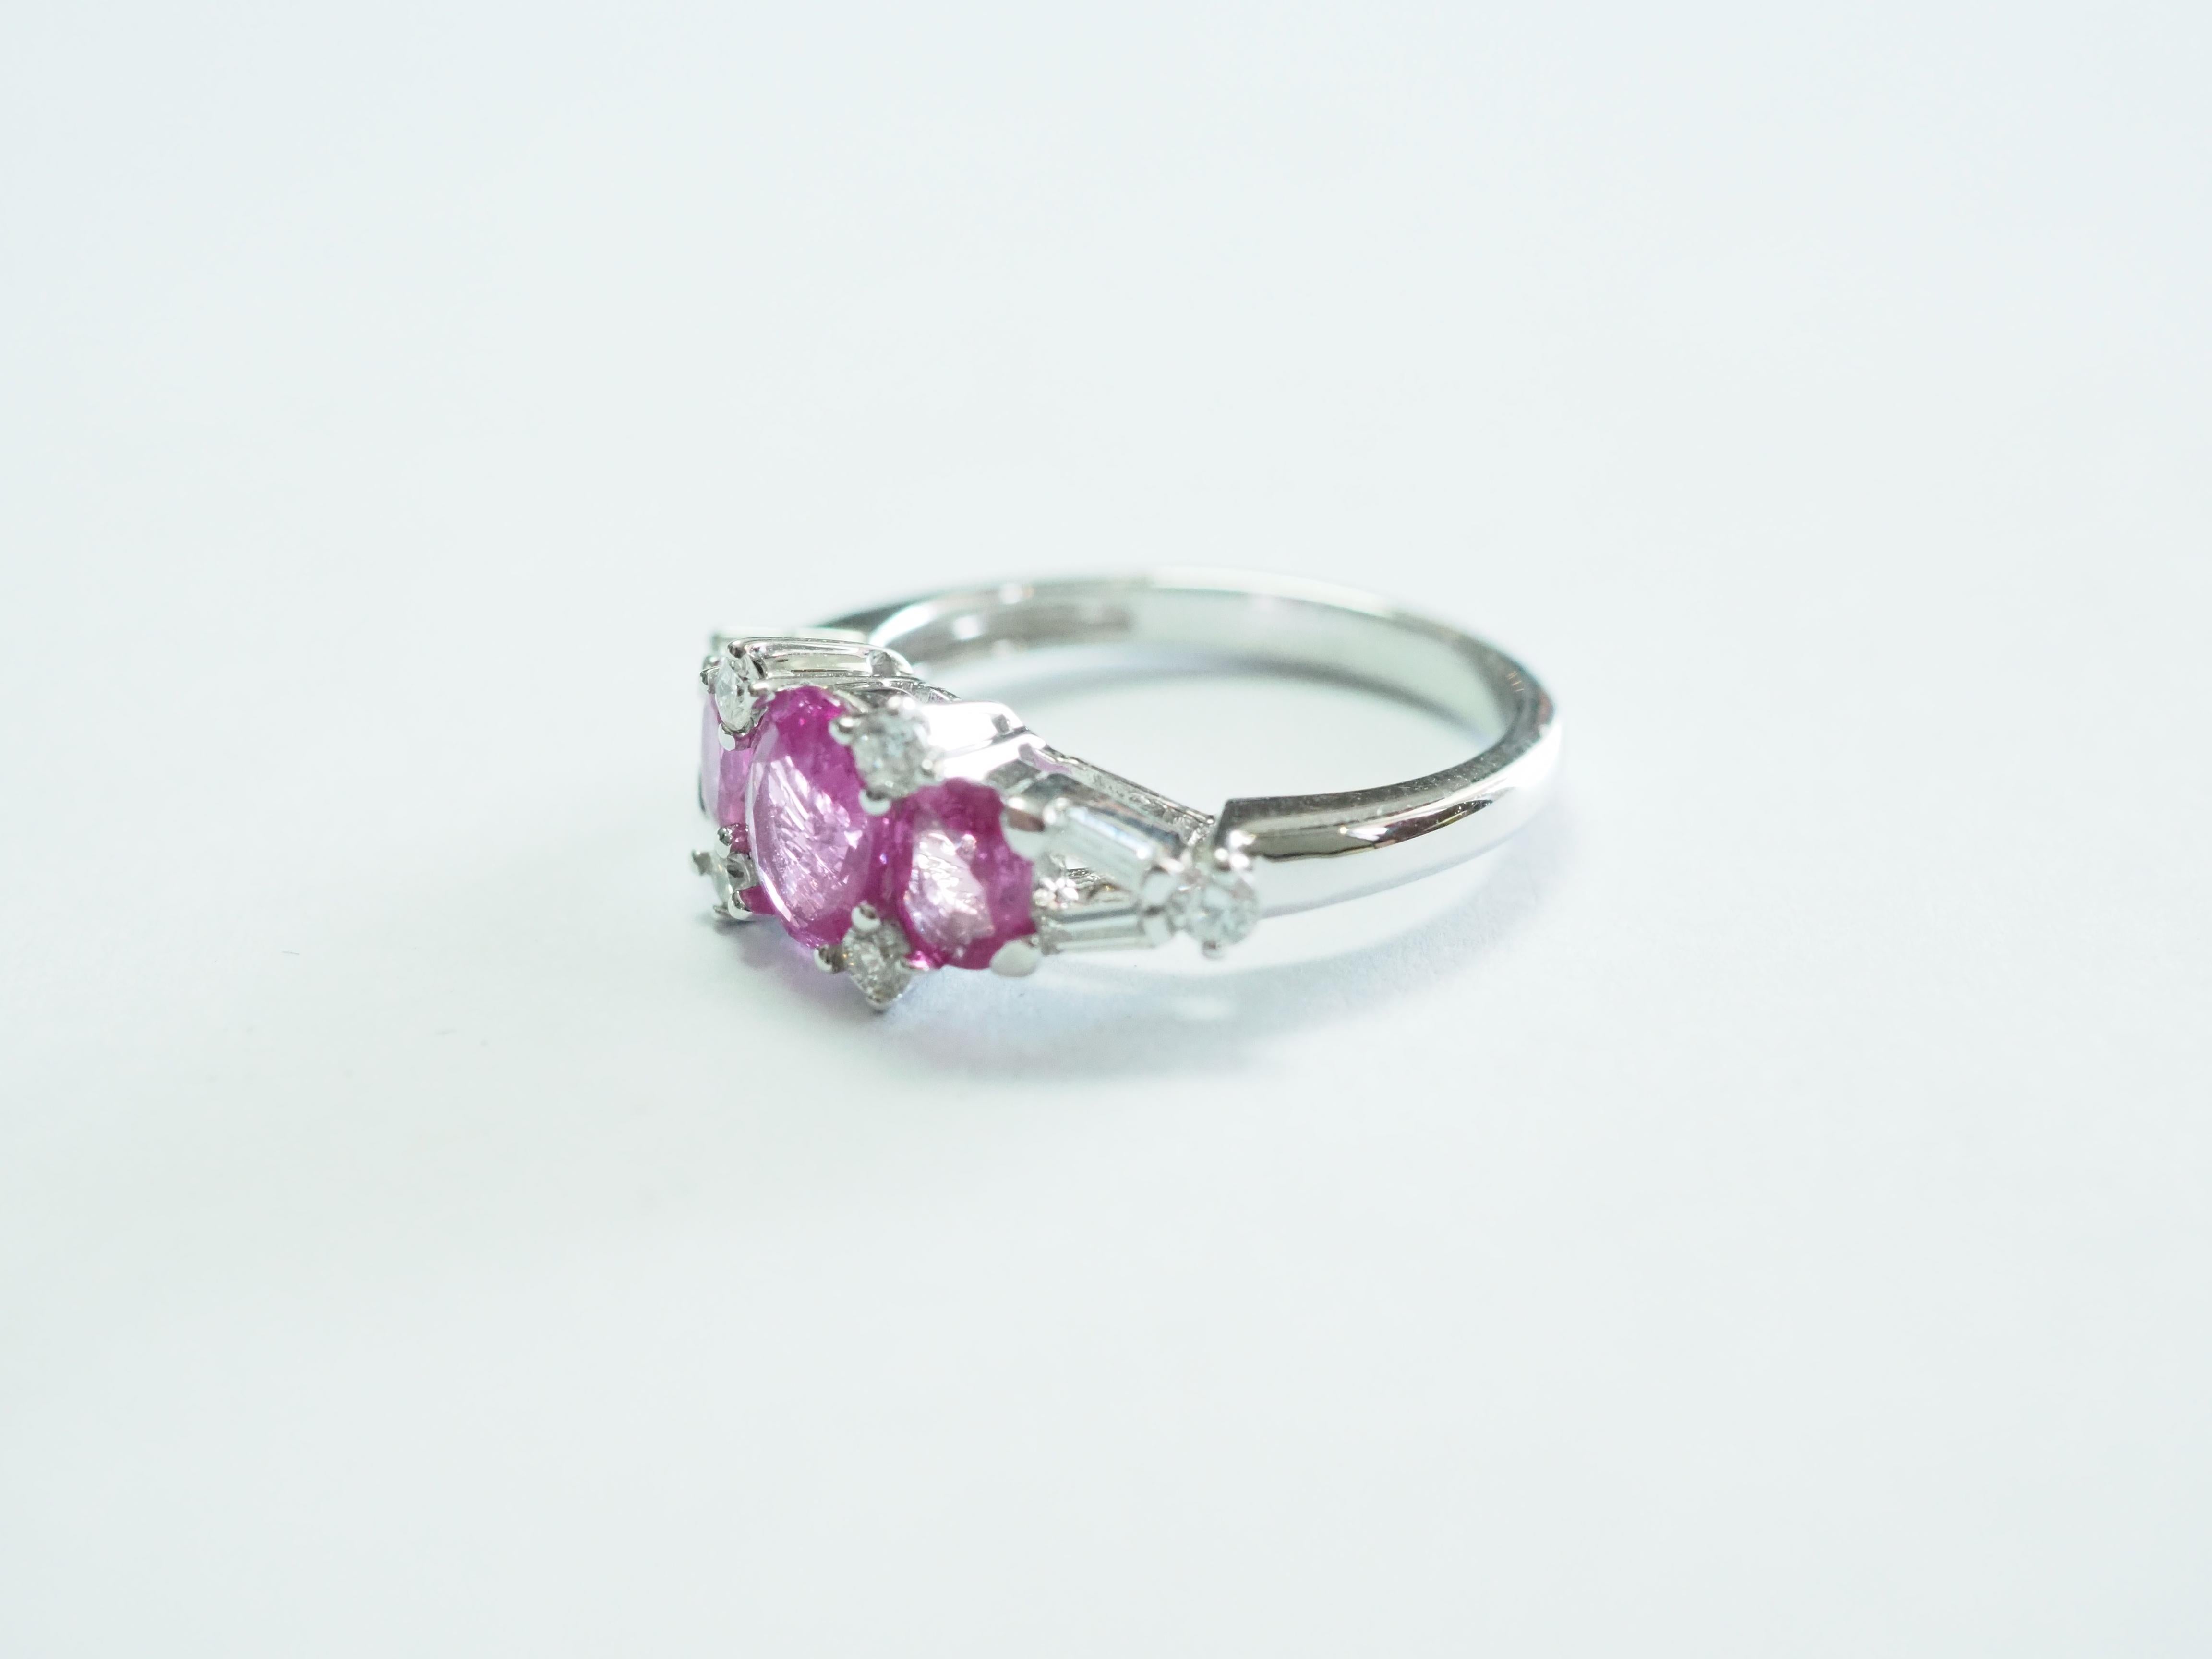 Auction Estimate:
$625 - $2,800

This quality and beautiful engagement piece is an 18K white gold fine quality pink sapphire and diamond ring. 3 bubblegum oval pink sapphires are set meticulously and at the center is the largest one. There are 4 of